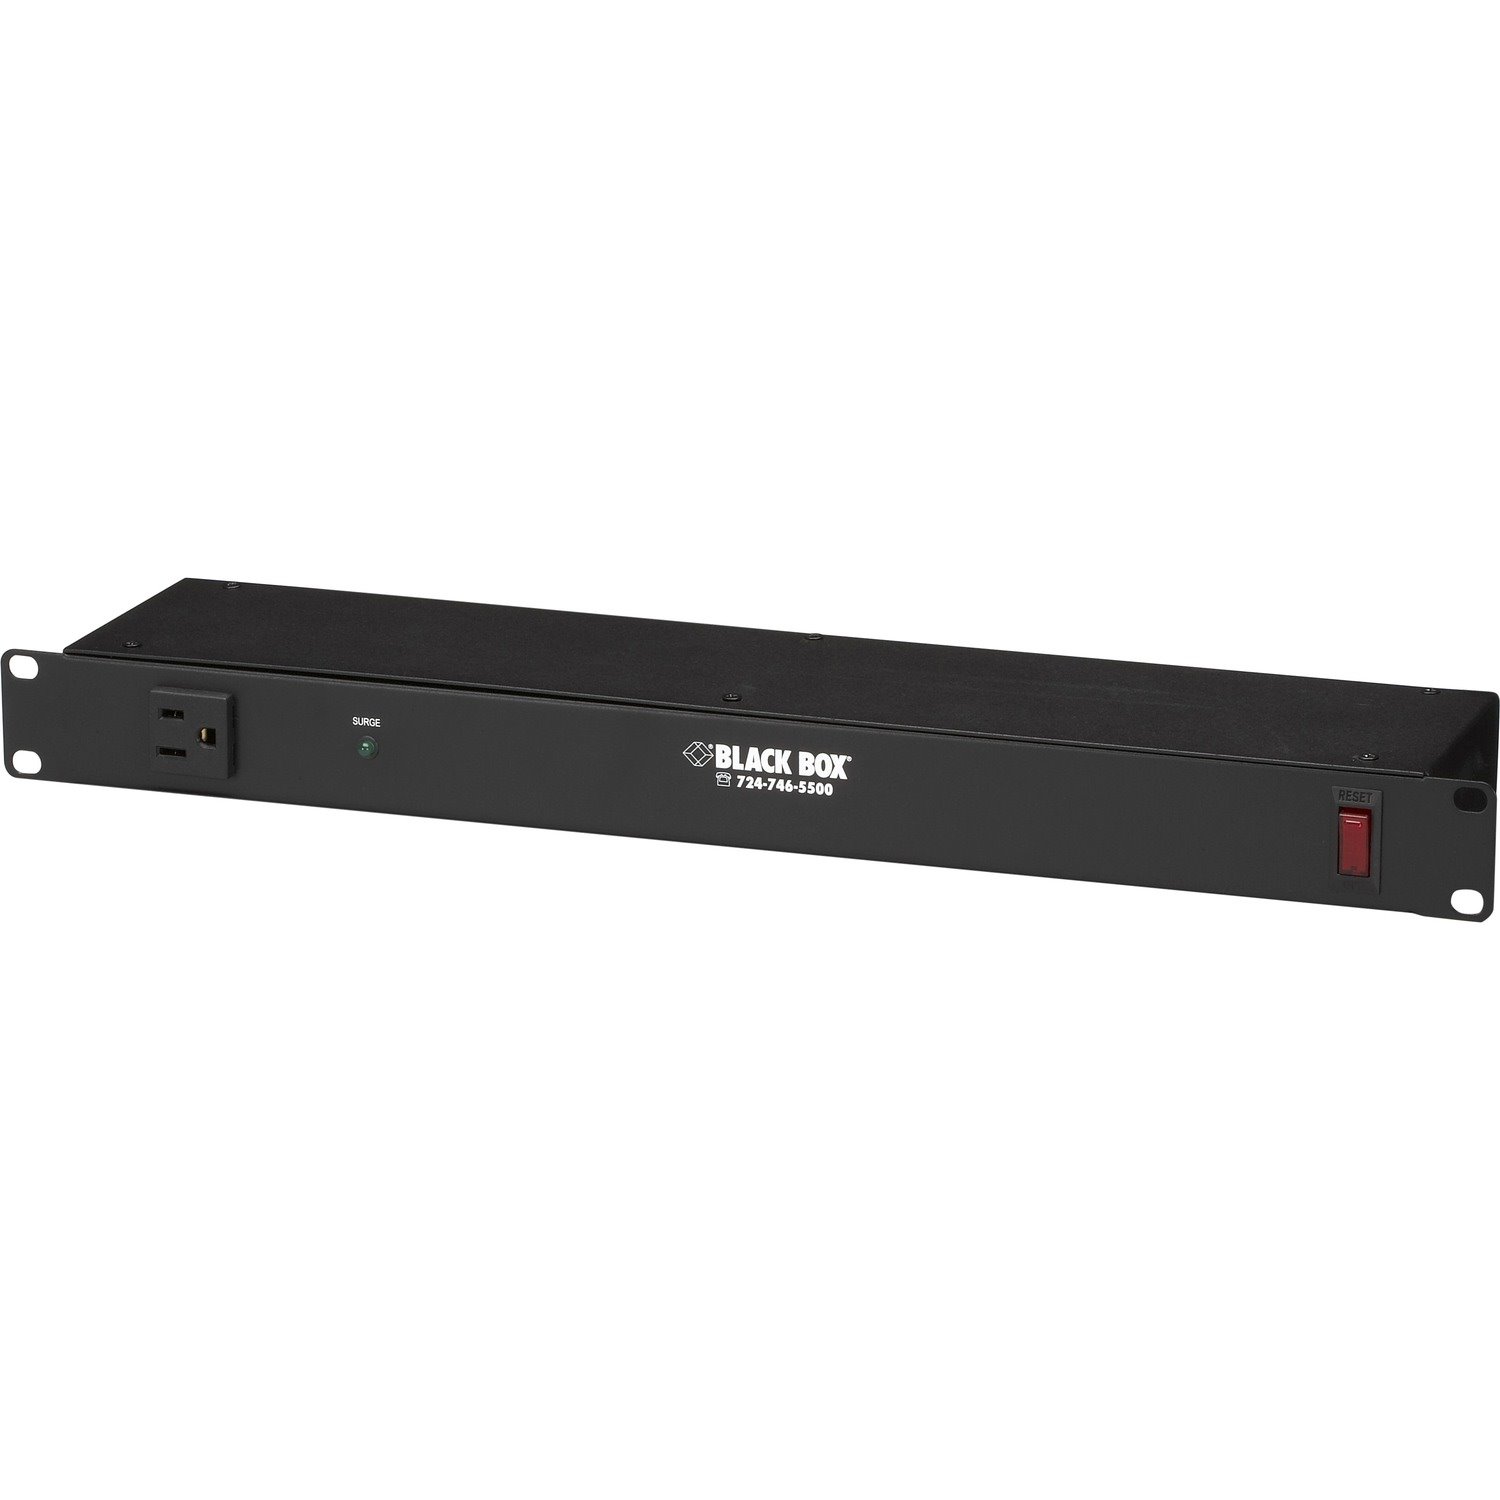 Black Box Rackmount PDU with Surge Protection 120V 15A 9-Outlet